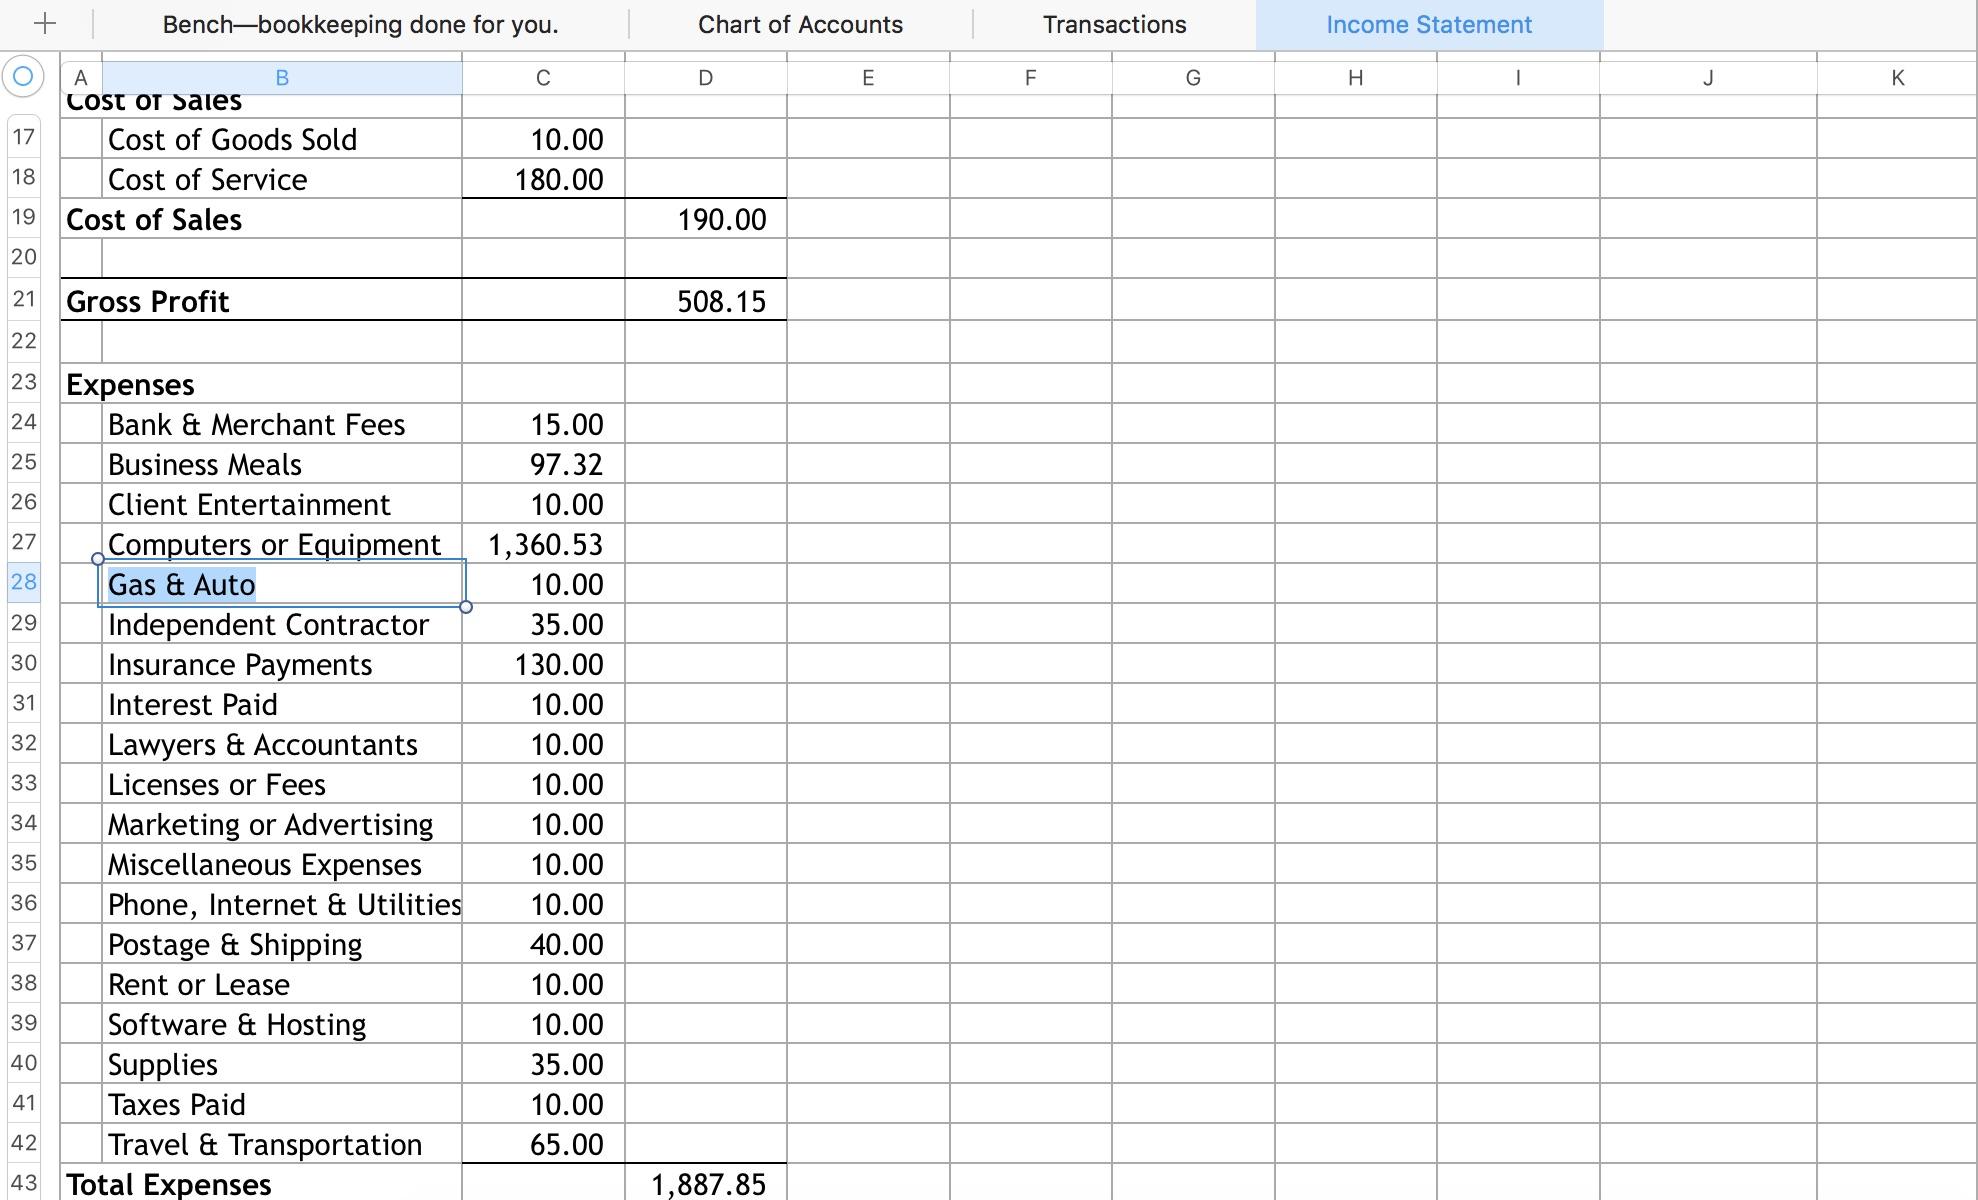 Chart of accounts excel template free download